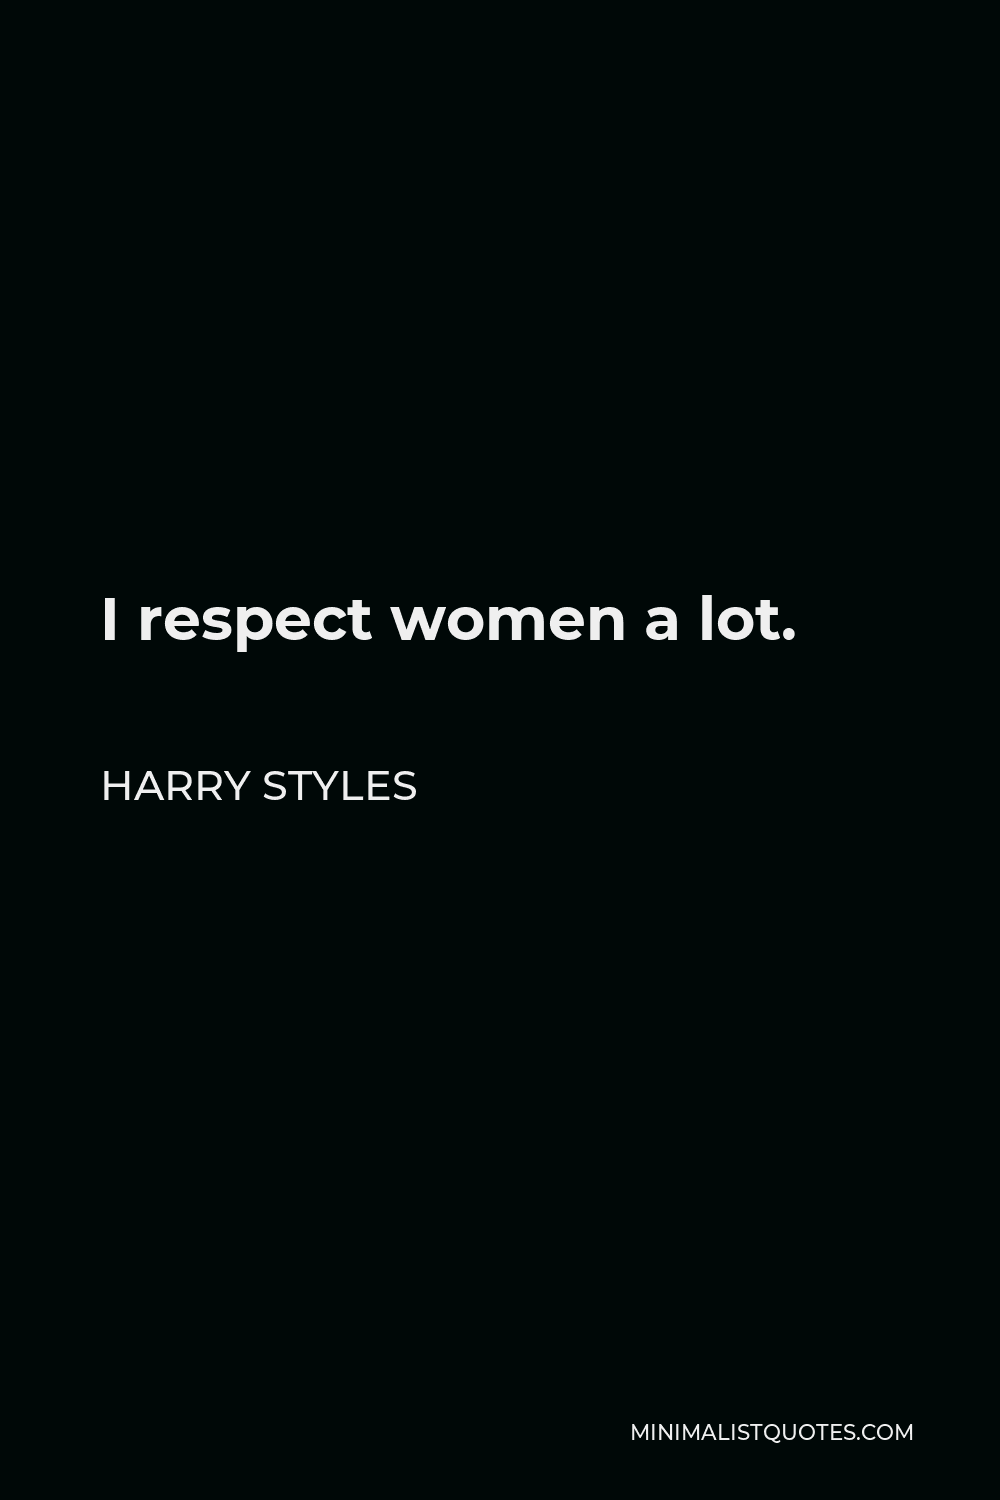 Harry Styles Quote: I respect women a lot.